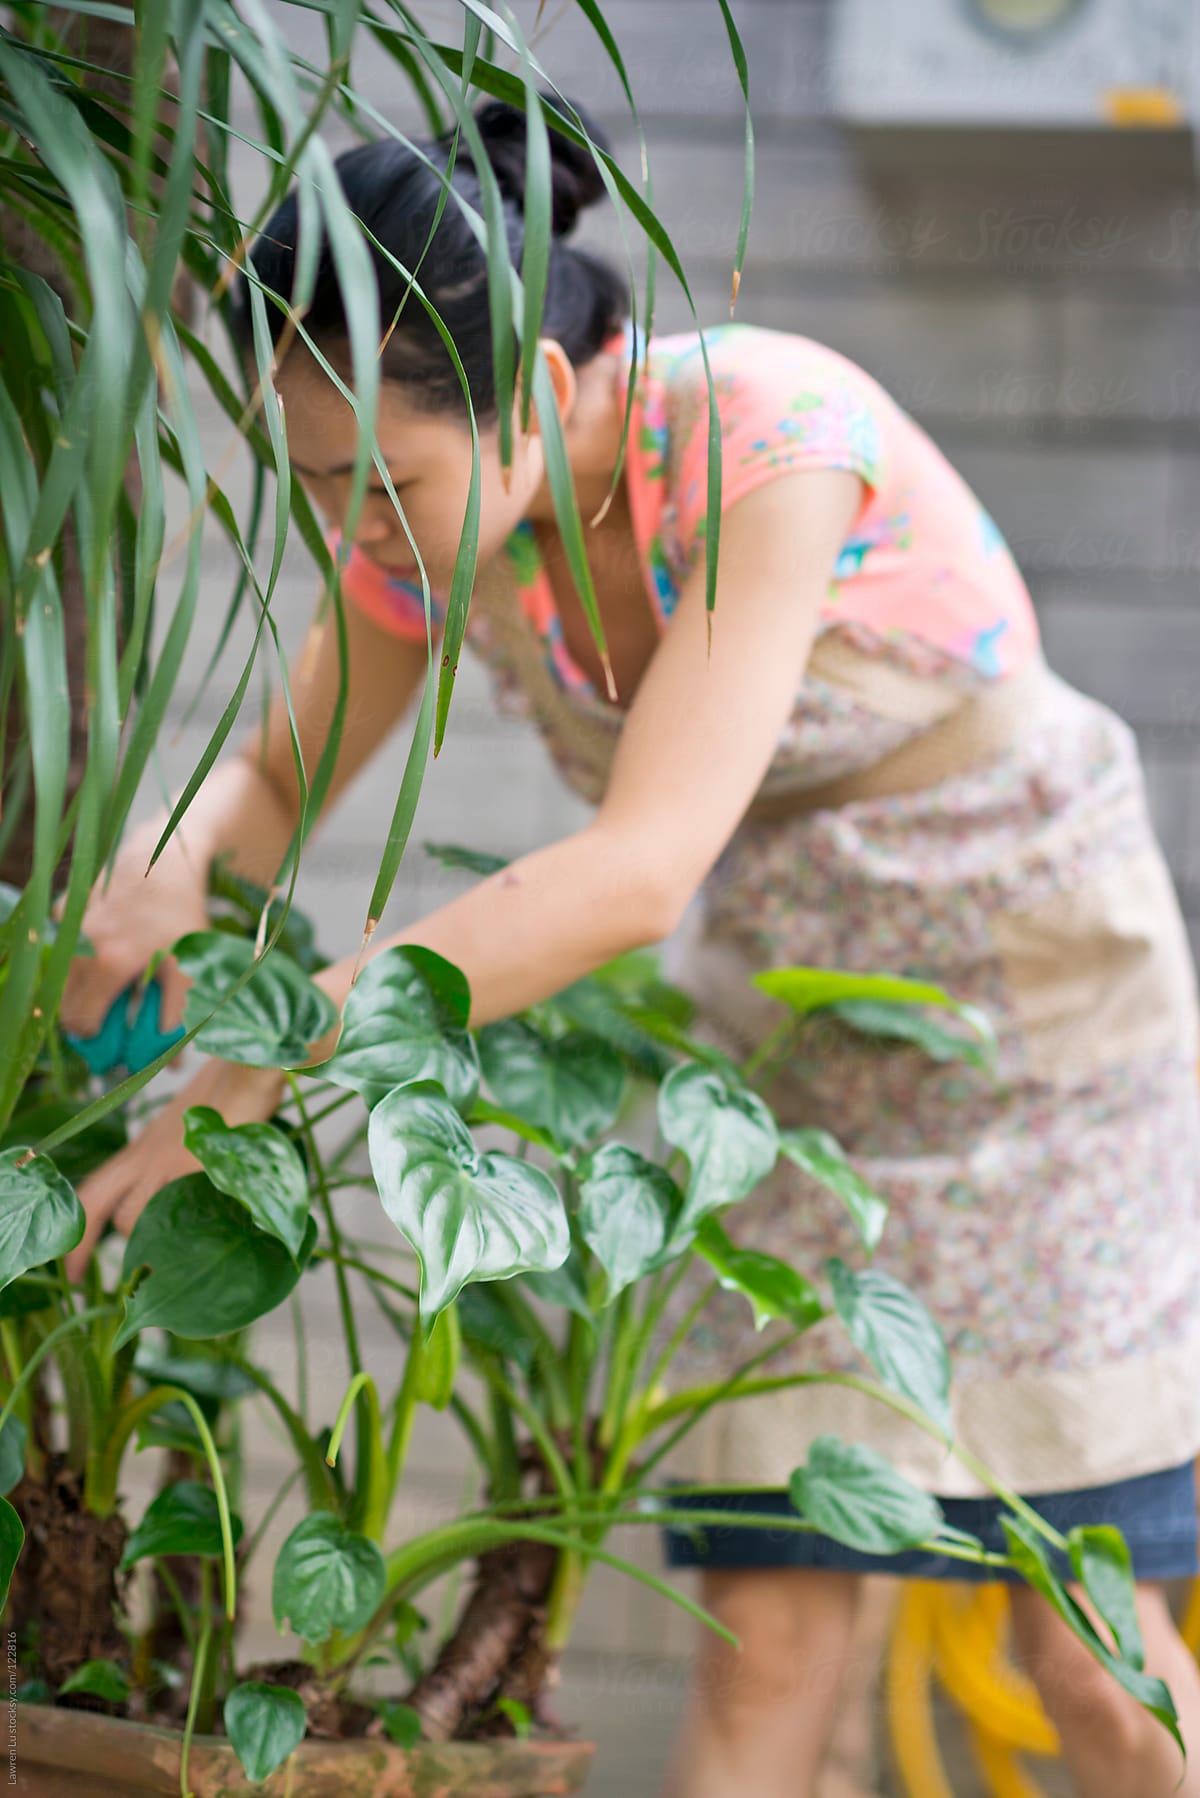 Young woman trimming plants in garden